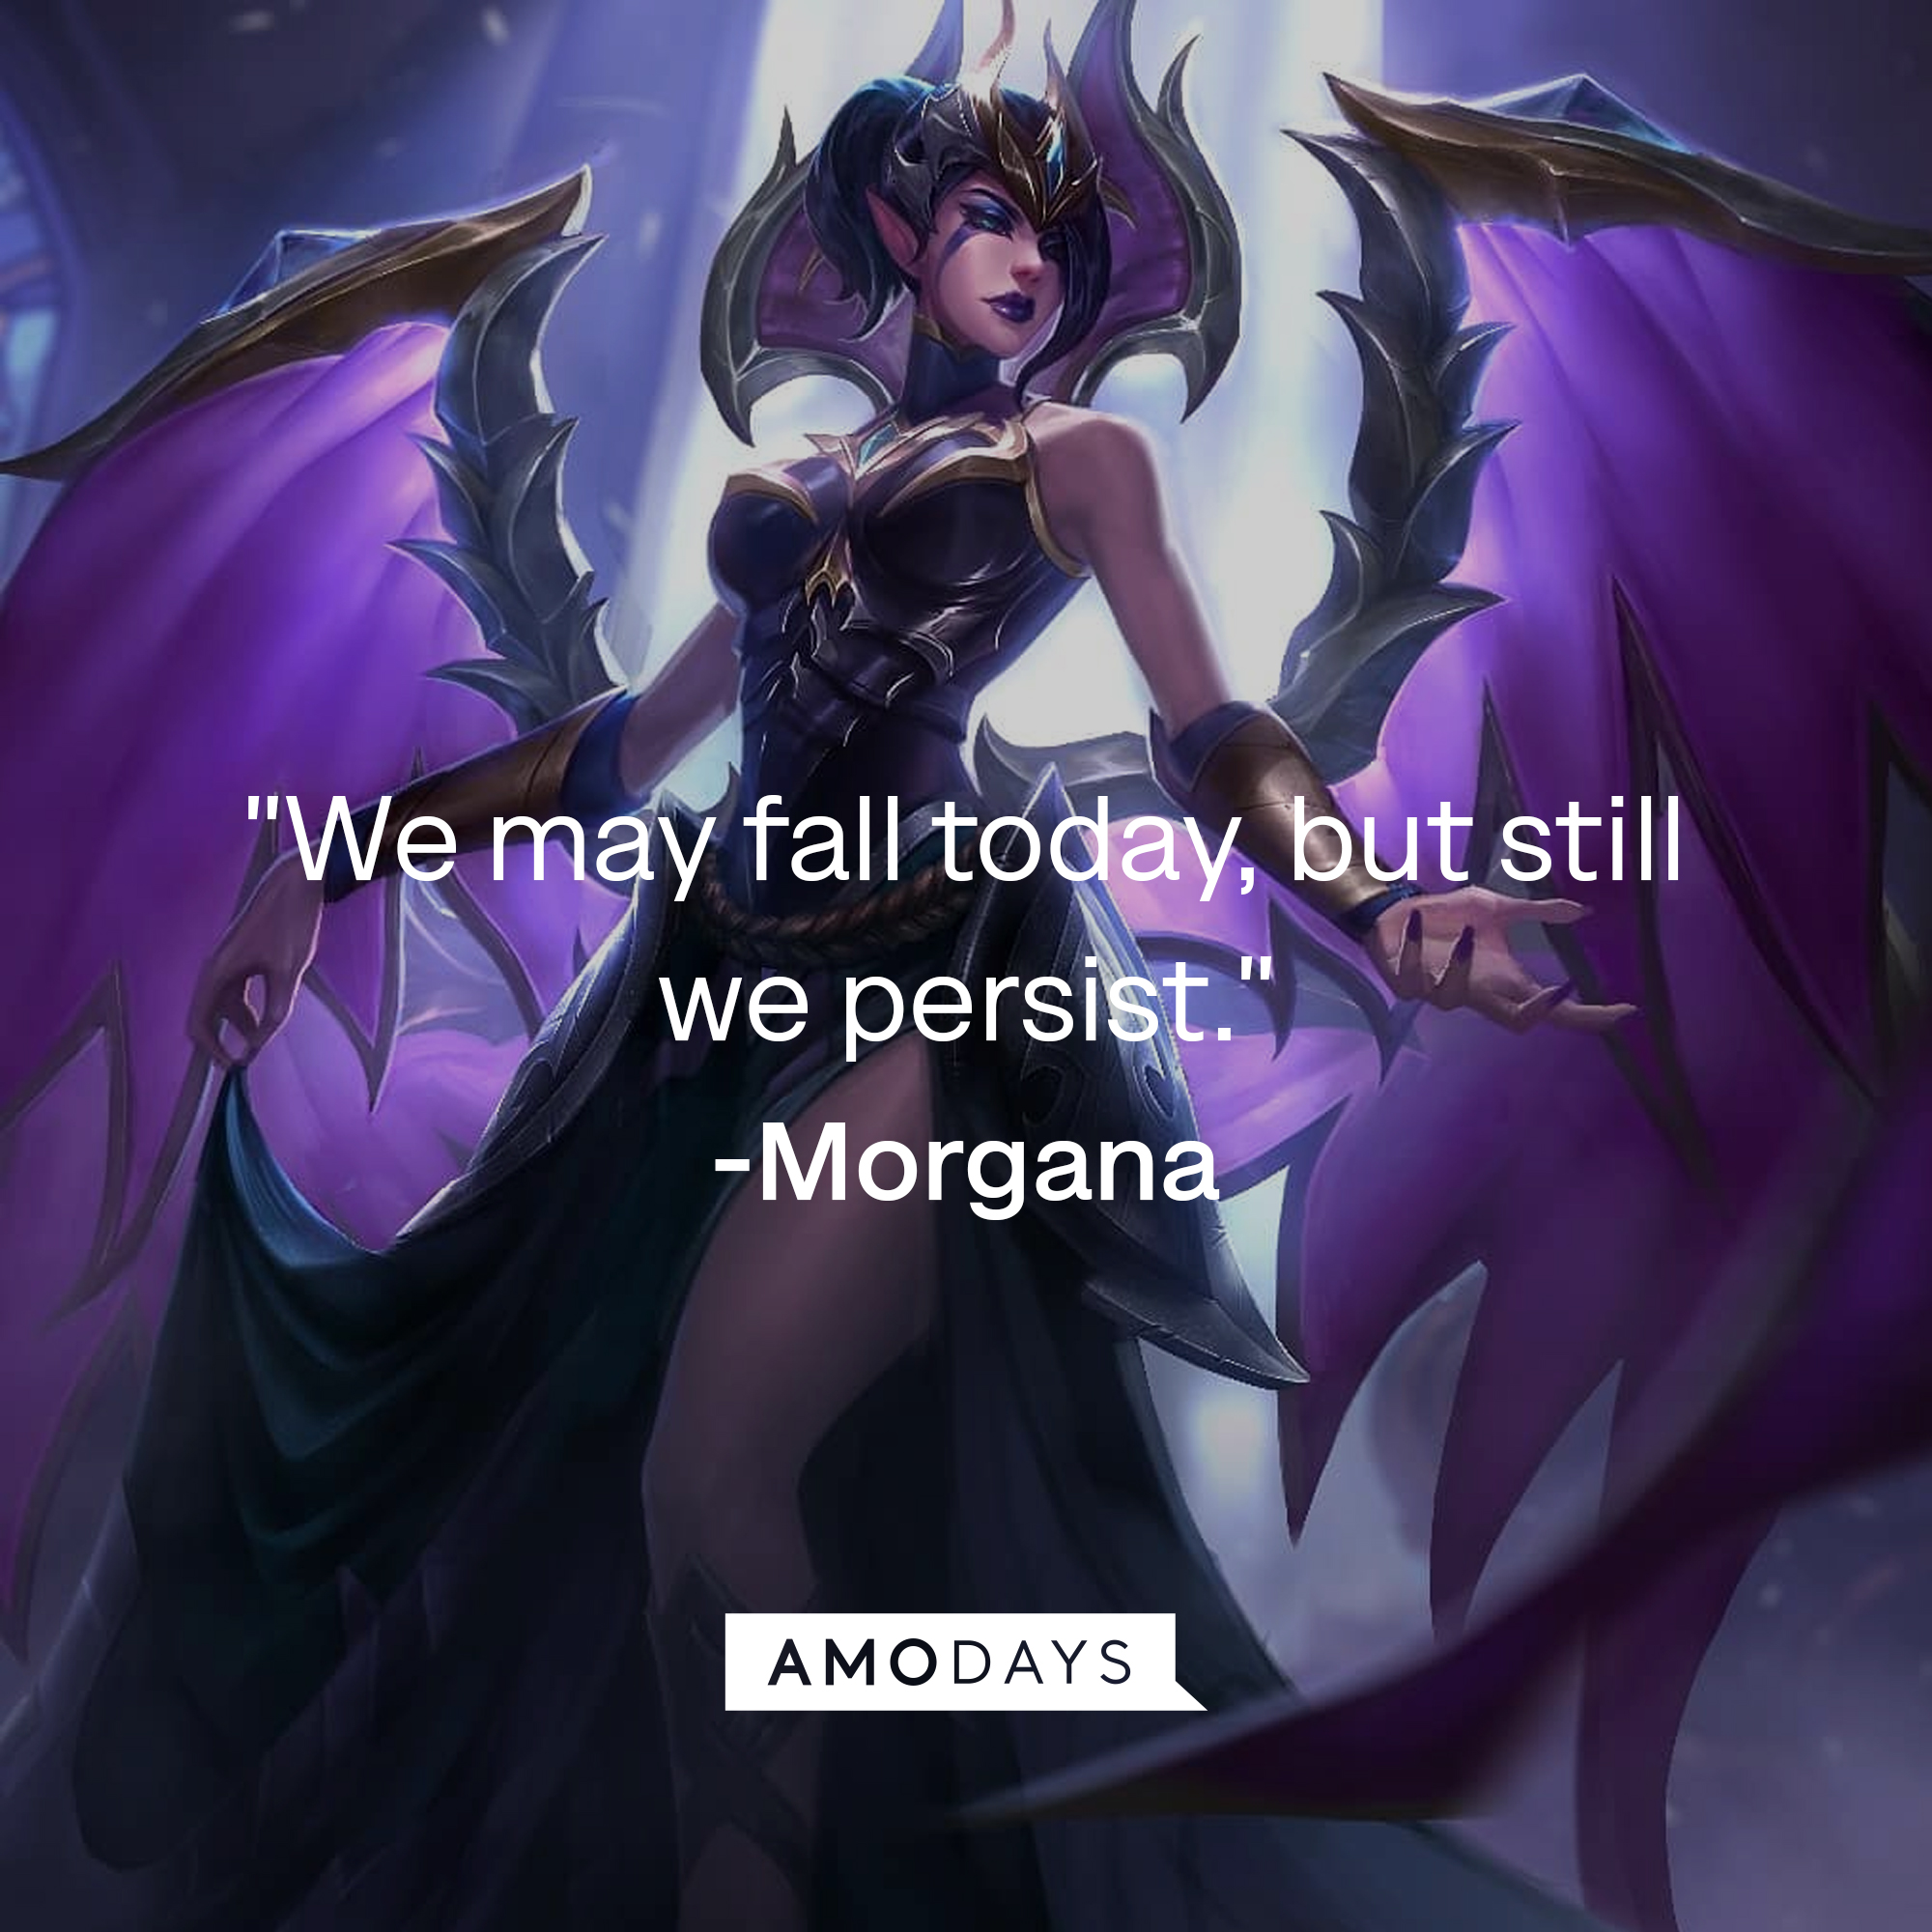 An image of Morgana, with her quote: "We may fall today, but still we persist." | Source: Facebook.com/leagueoflegends